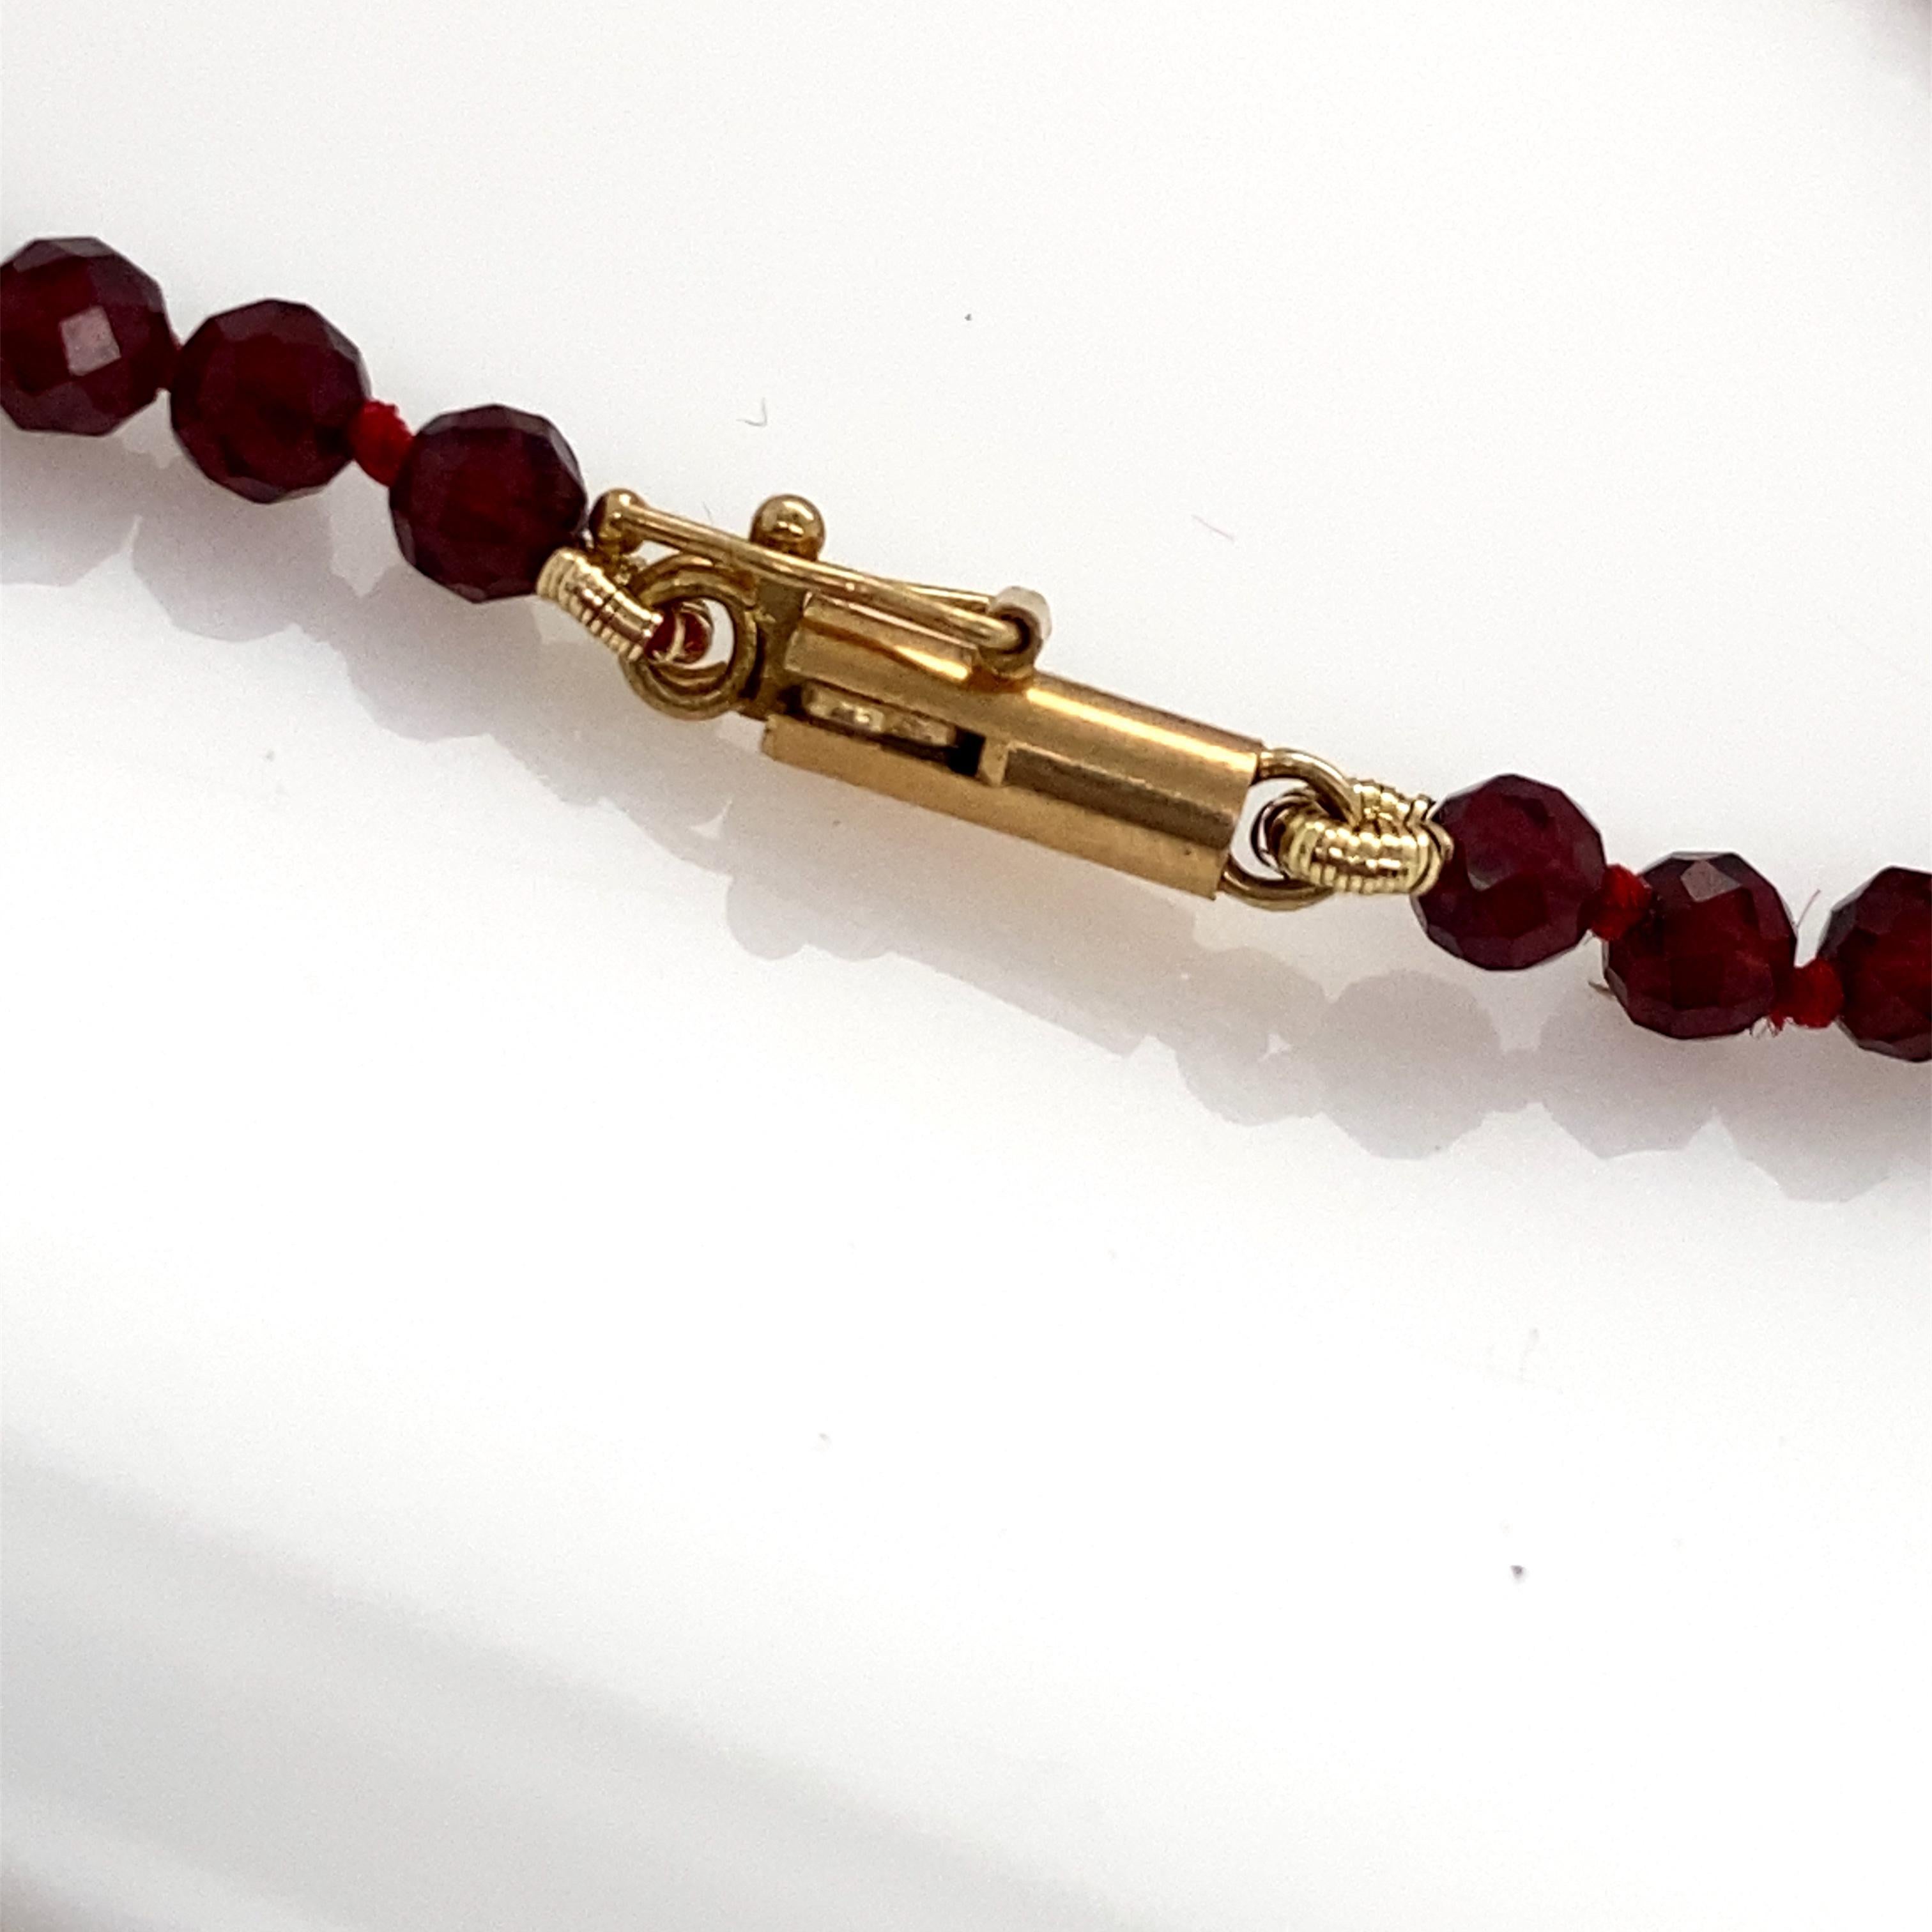 Small Fox or Wolf Pendant with Ruby Eyes in 18K Gold on Faceted Garnet Chain 7